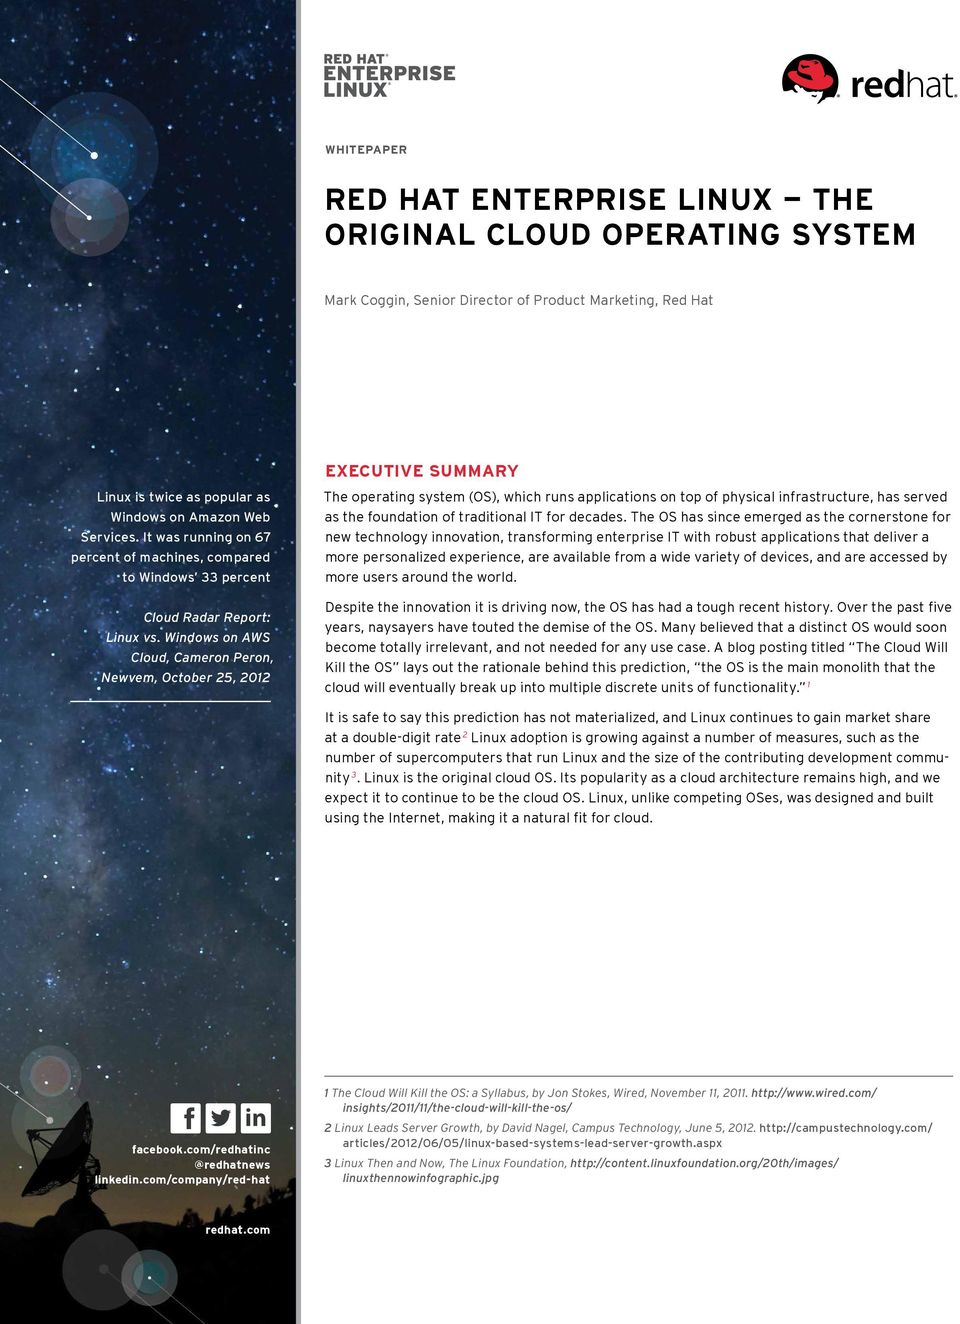 Windows on AWS Cloud, Cameron Peron, Newvem, October 25, 2012 The operating system (OS), which runs applications on top of physical infrastructure, has served as the foundation of traditional IT for